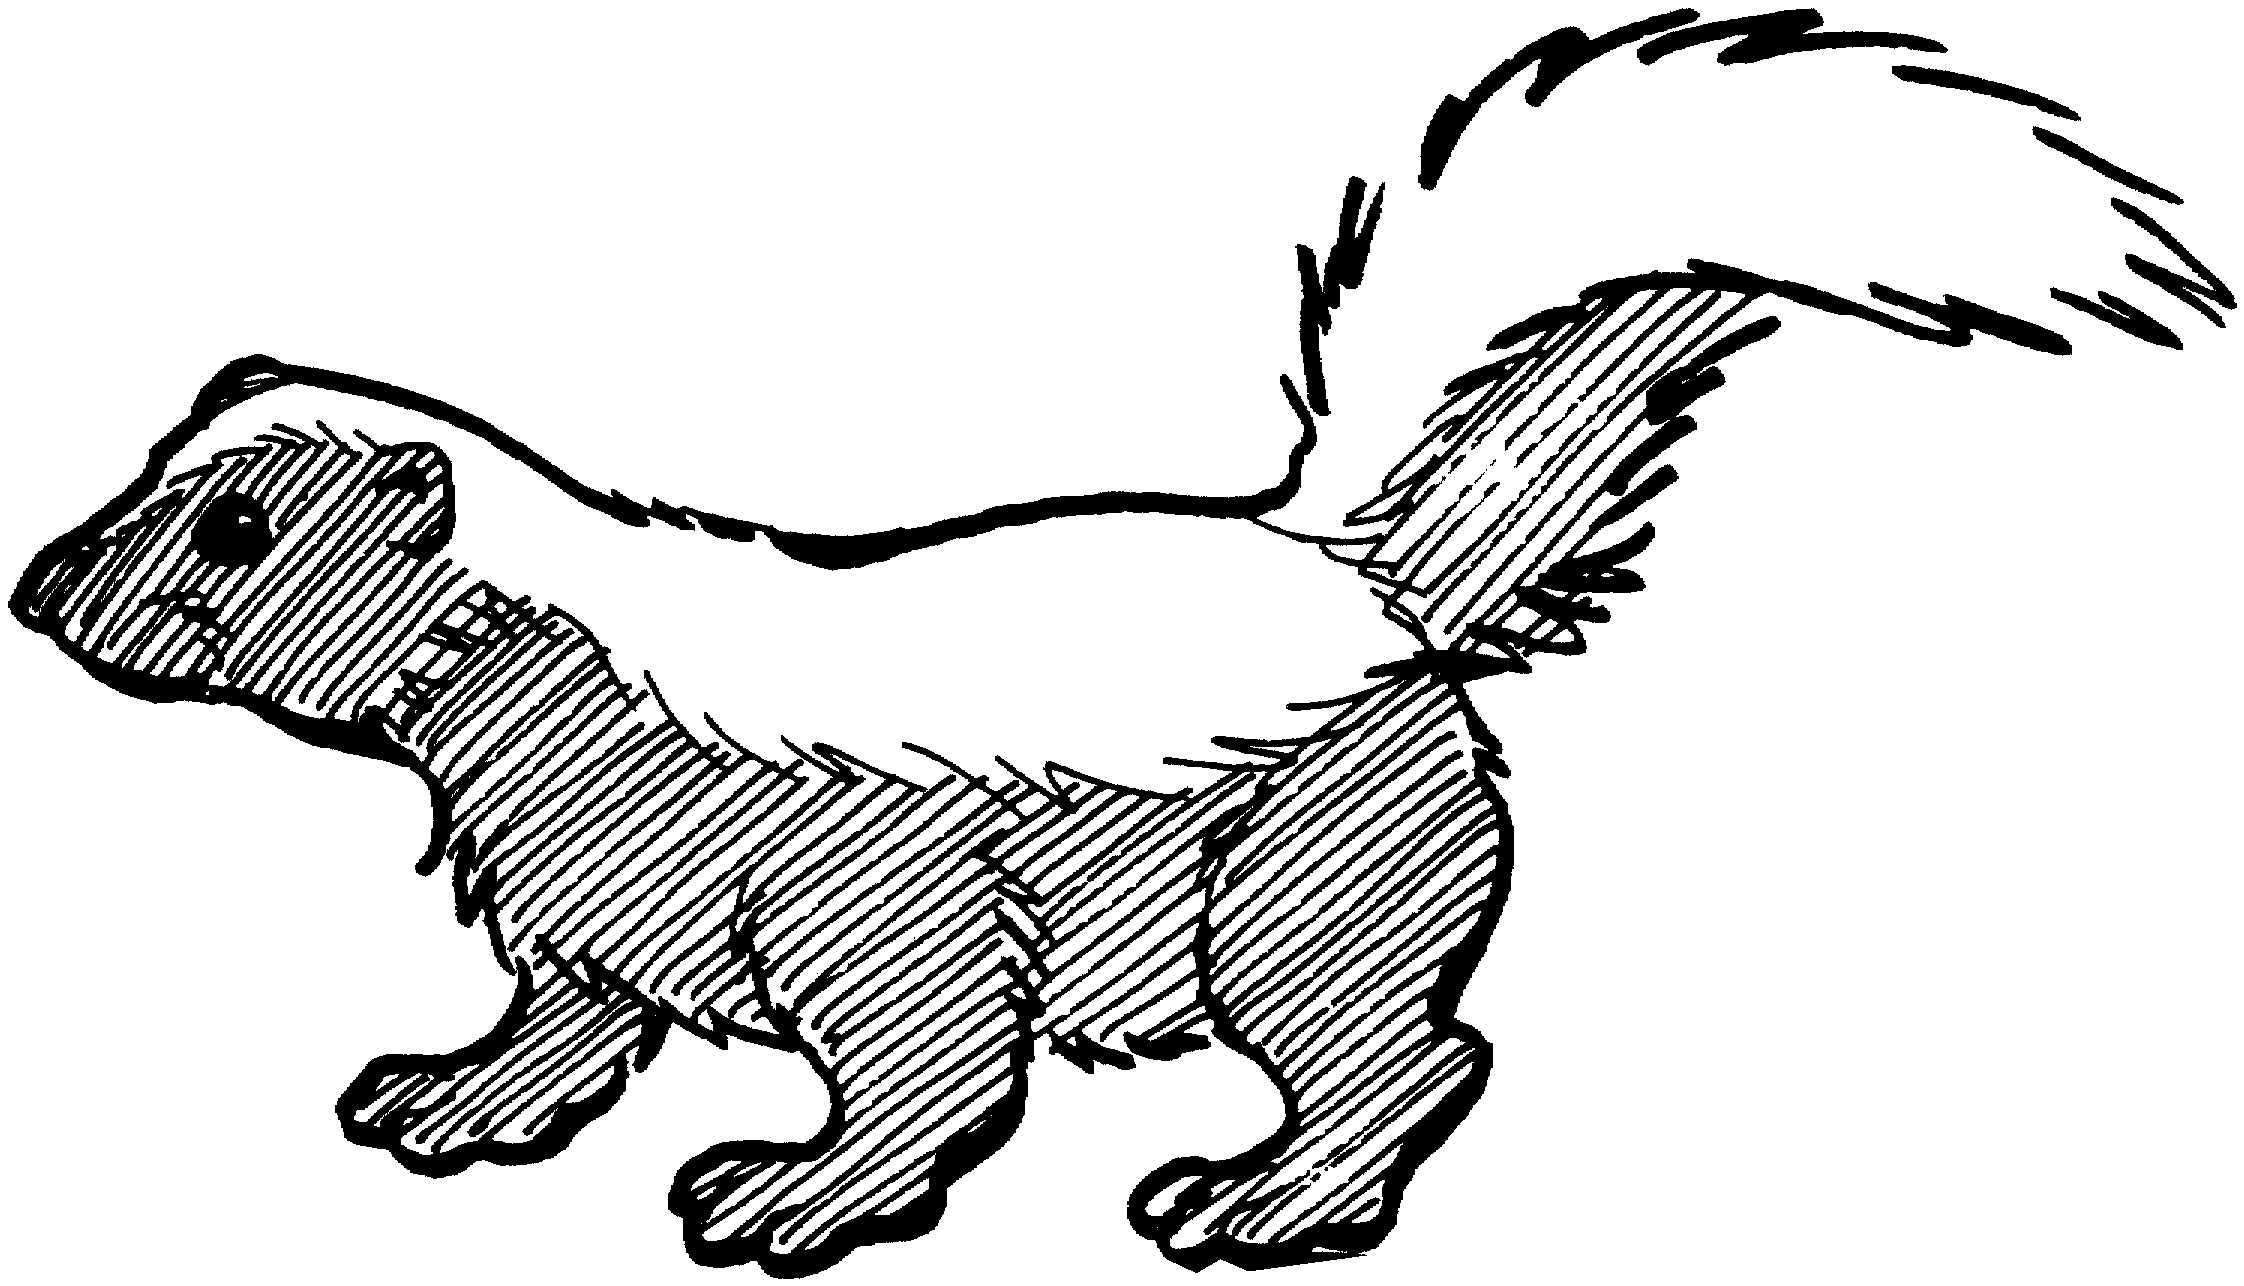 Skunk clipart black and white 2 » Clipart Station.